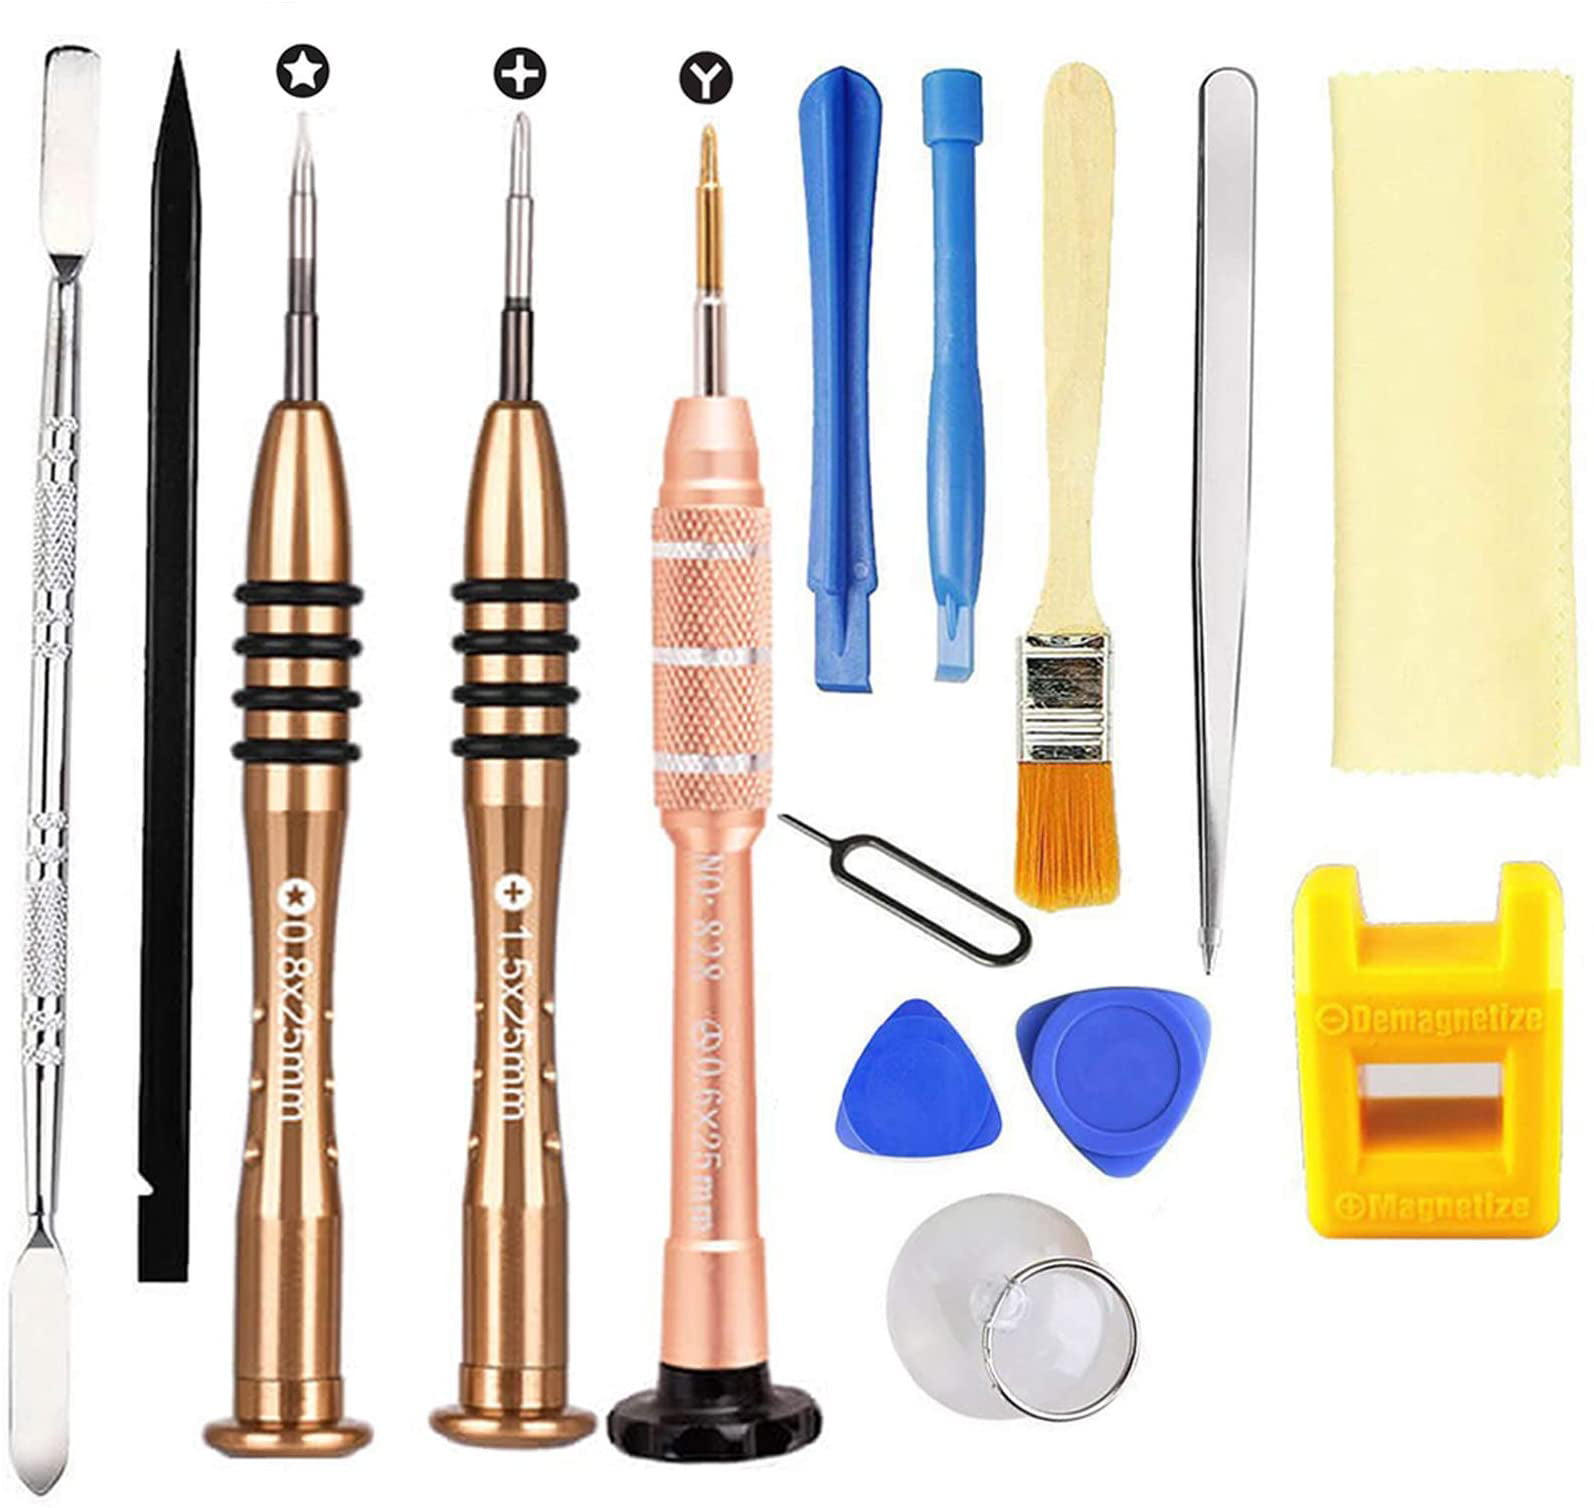 iPhone 4 & 4S 5 in 1 JIADUOBAOSEN Explosion Gold Series Screwdriver Sets for iPhone 5 & 5S & 5C 